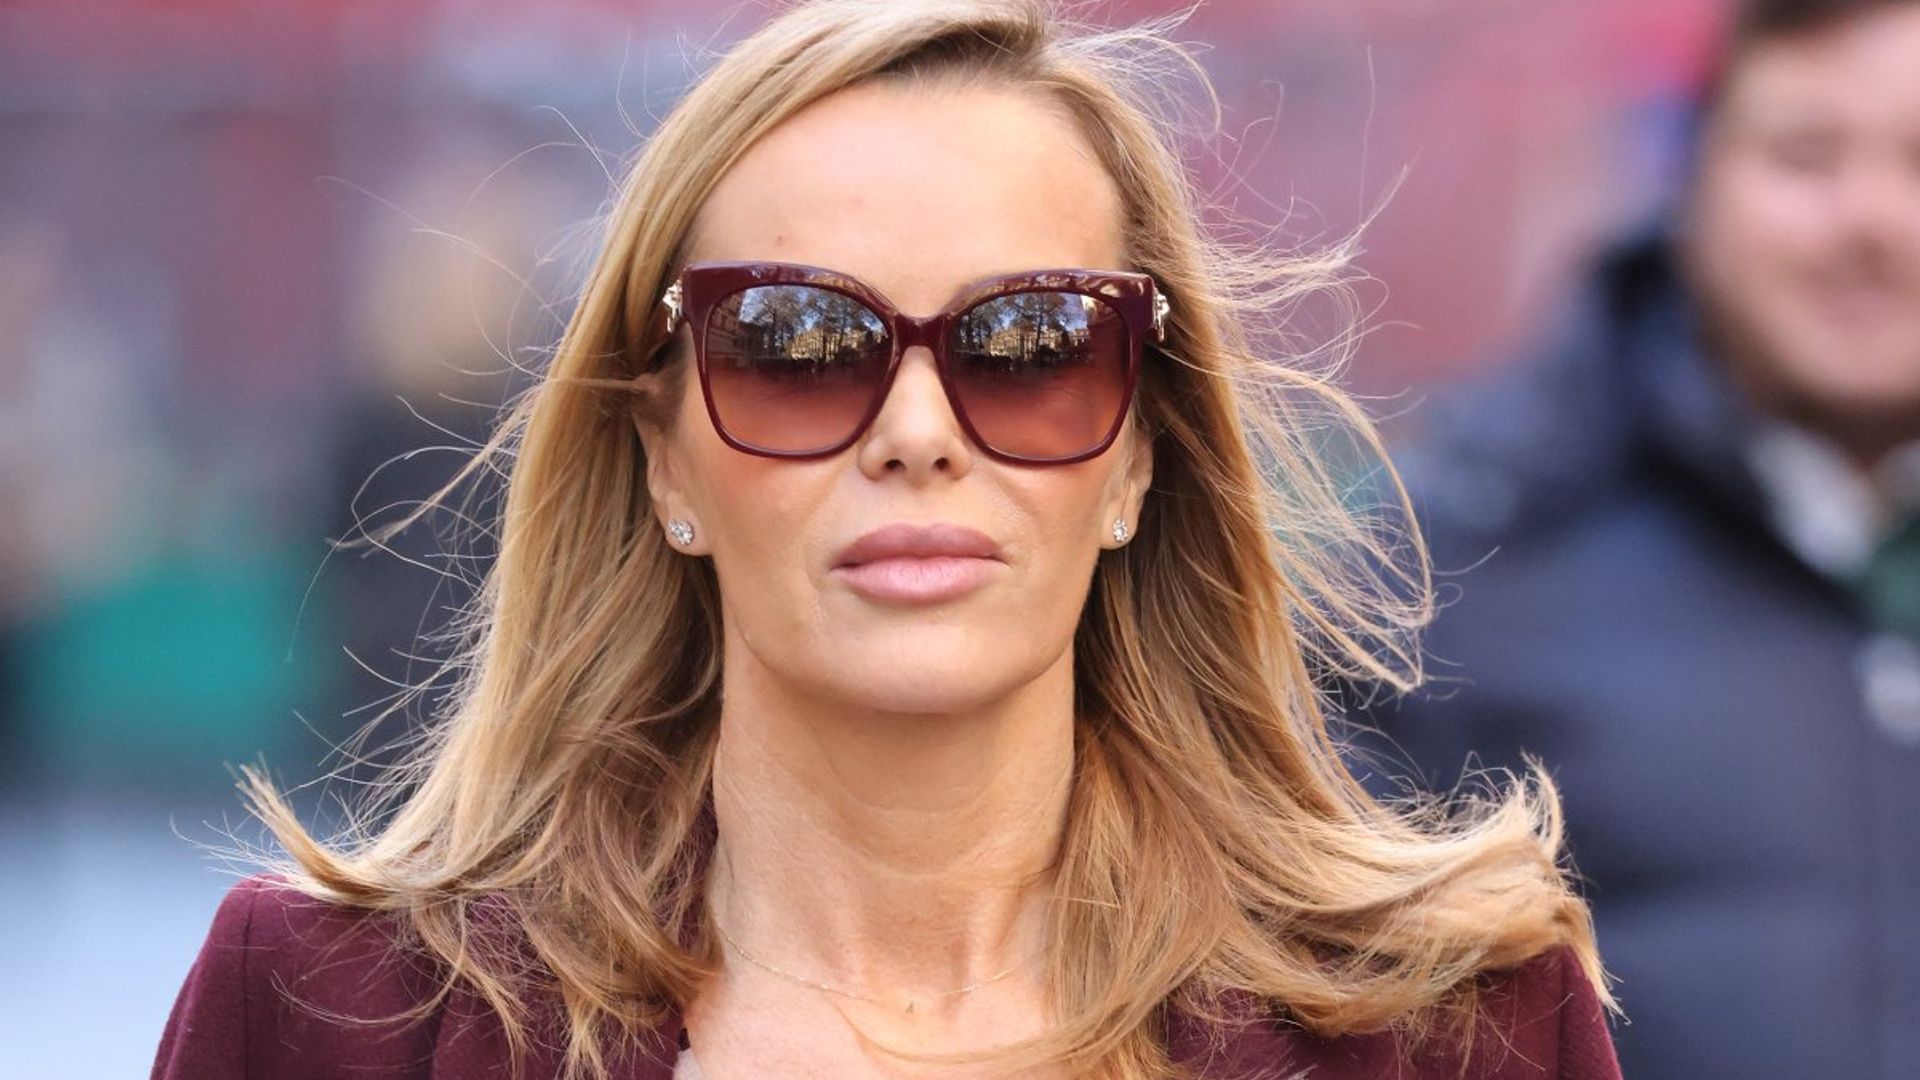 Amanda Holden supported by famous friends as she makes angry comment